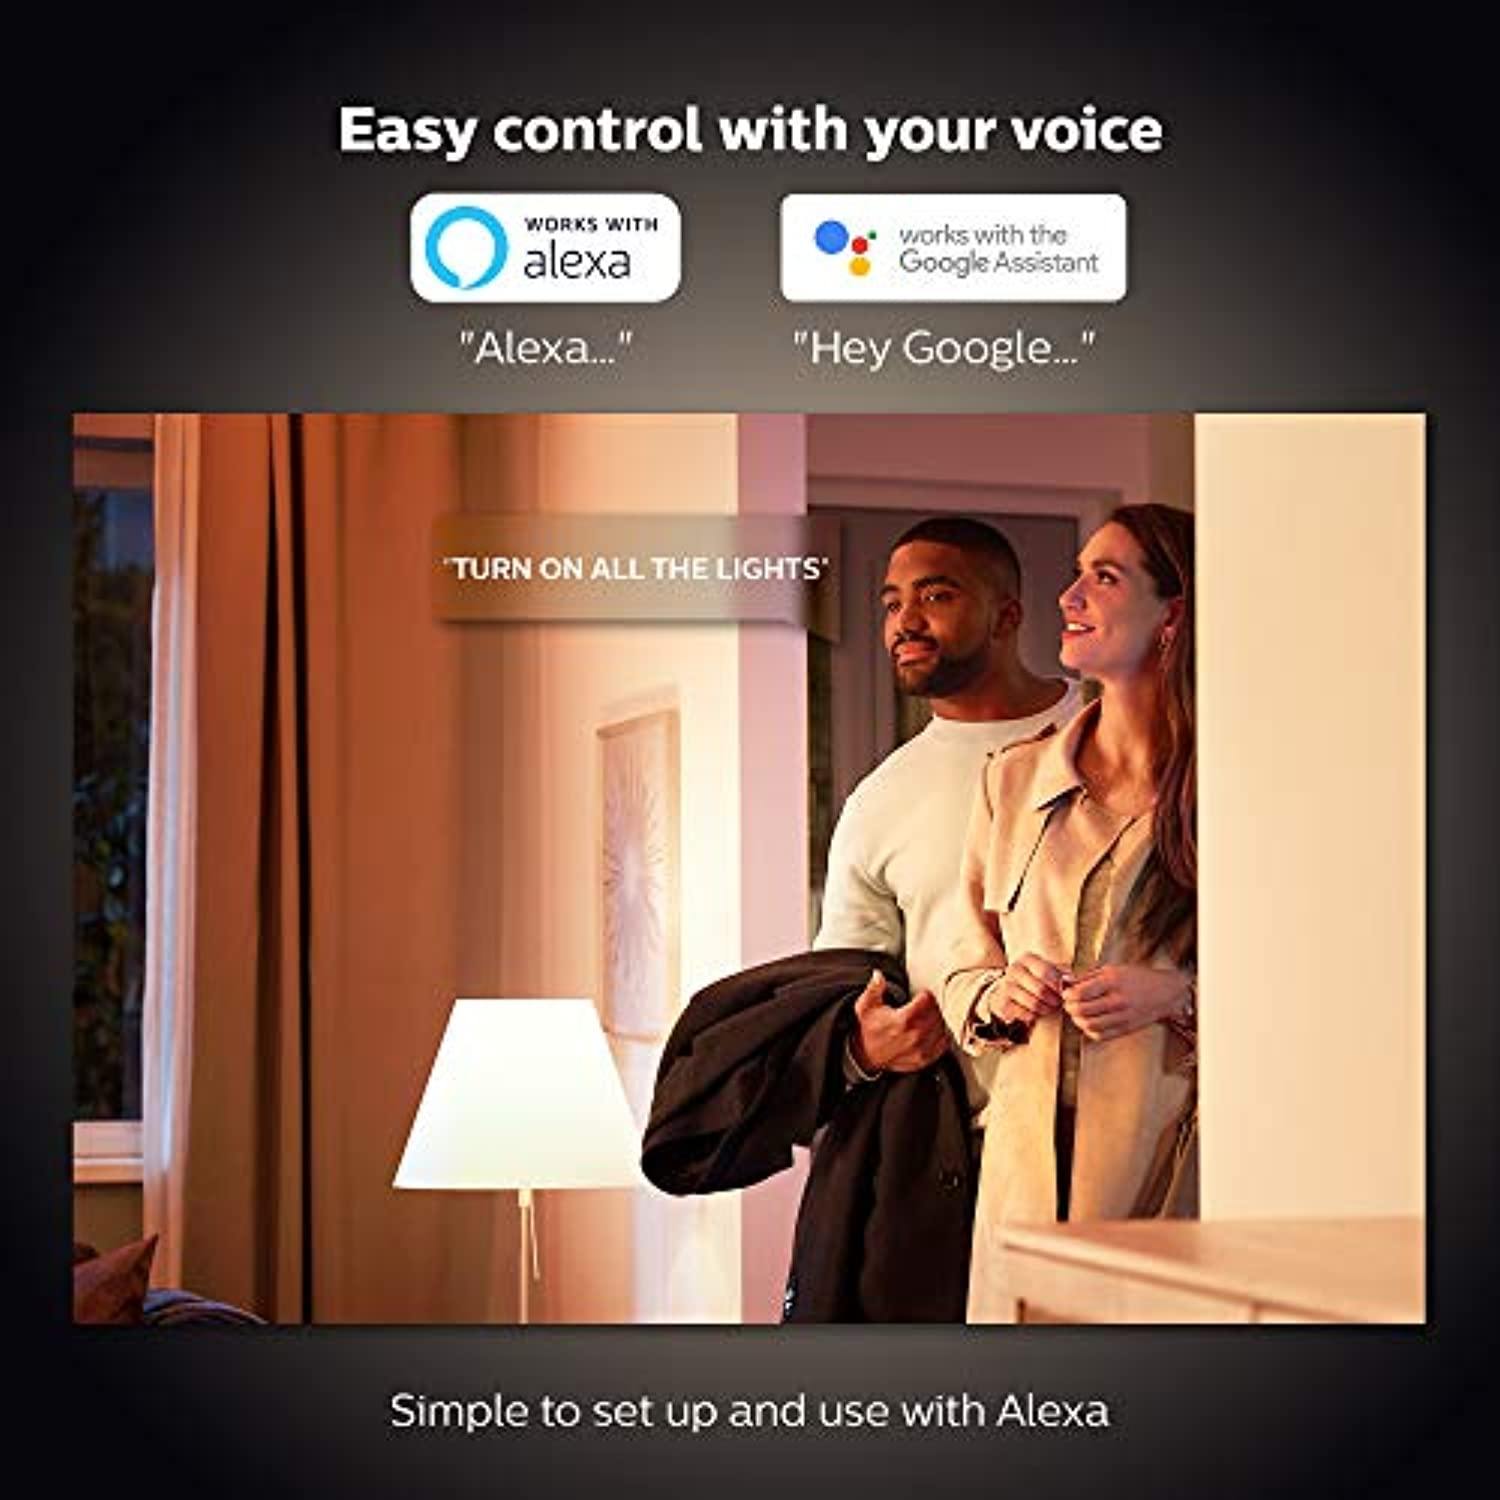 Philips Hue White Smart Bulb Twin Pack LED [B22 Bayonet Cap] with Bluetooth, Works with Alexa and Google Assistant - Offer Games